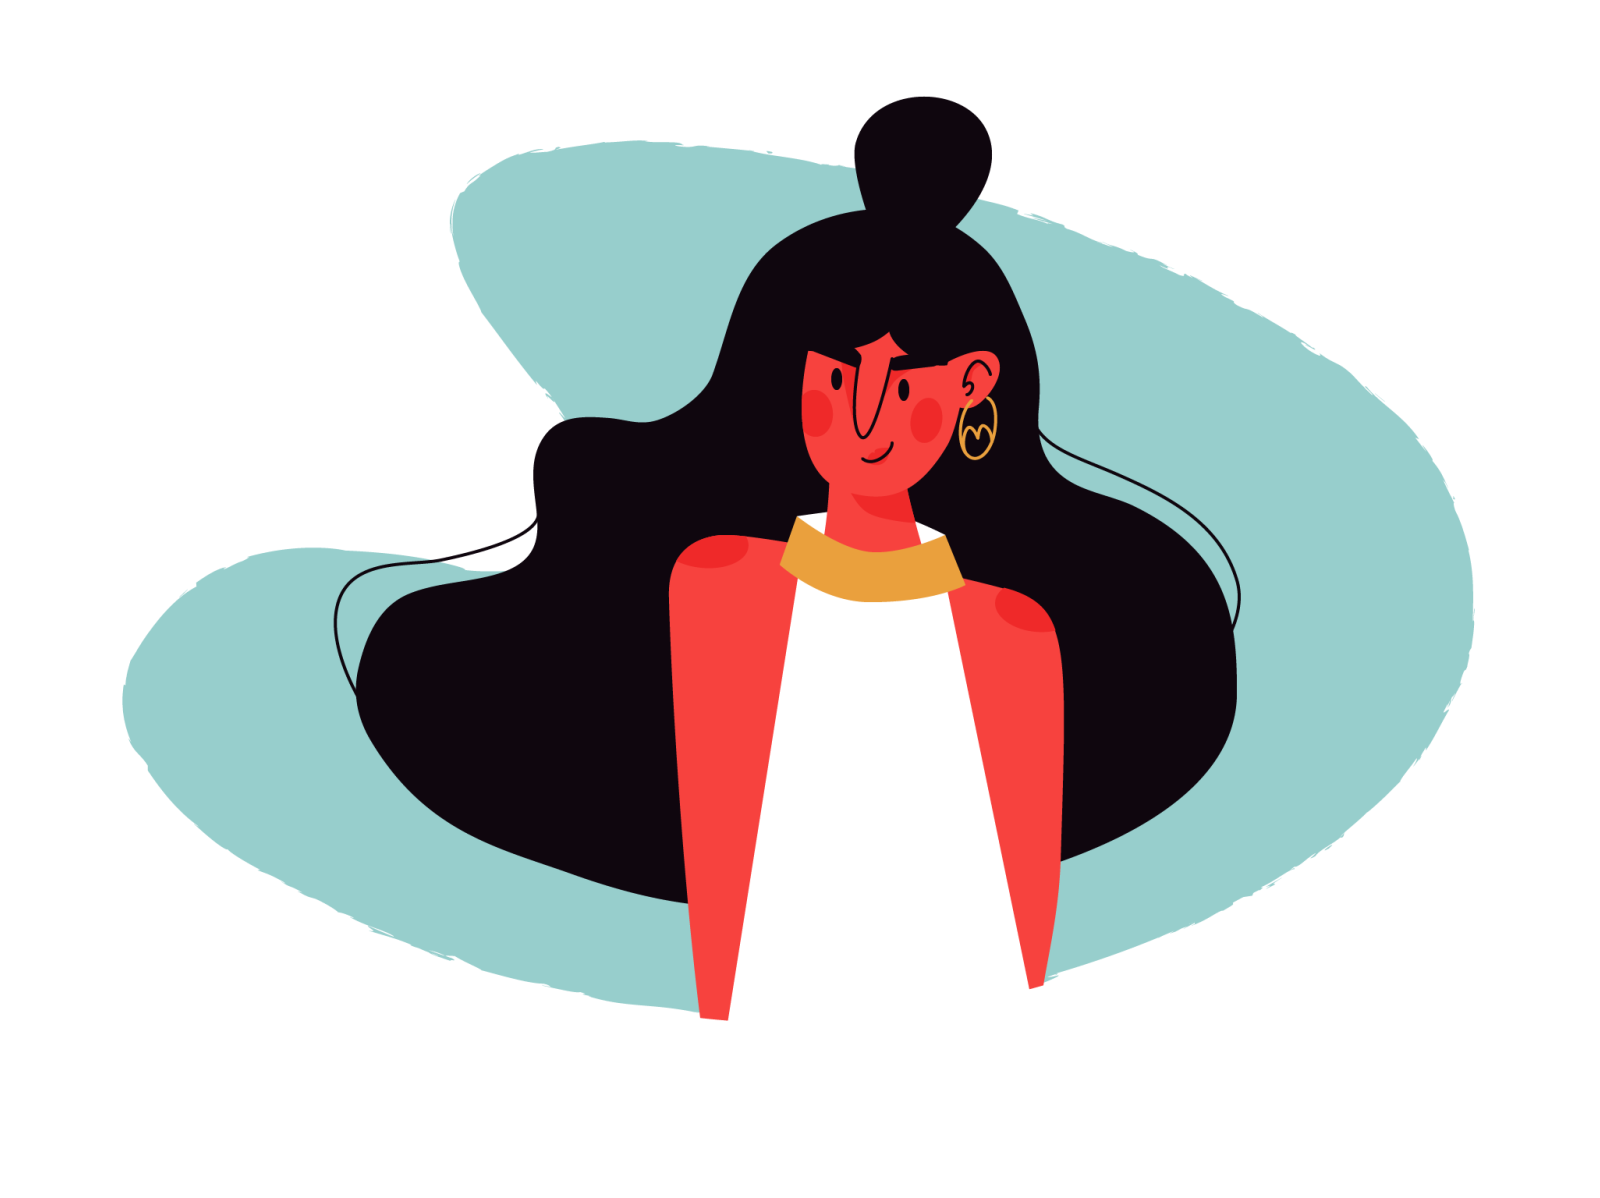 flat design girl texture by Chuyu Tong on Dribbble